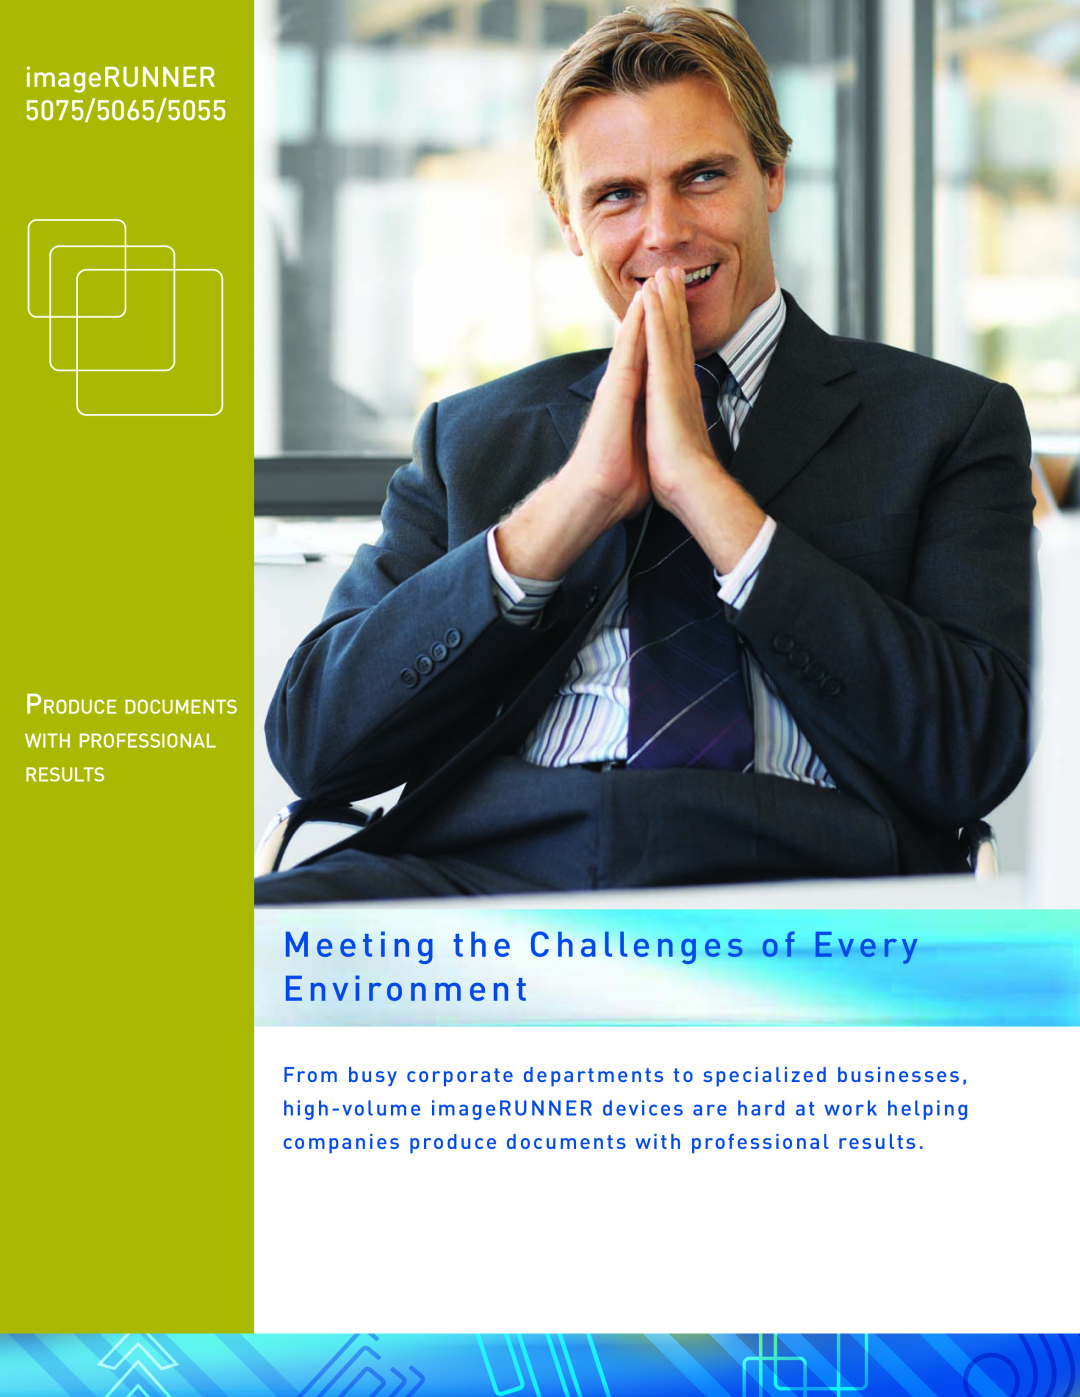 Pitney Bowes 5055, 5065 manual Meeting the Challenges of Every Environment, Produce documents with professional results 